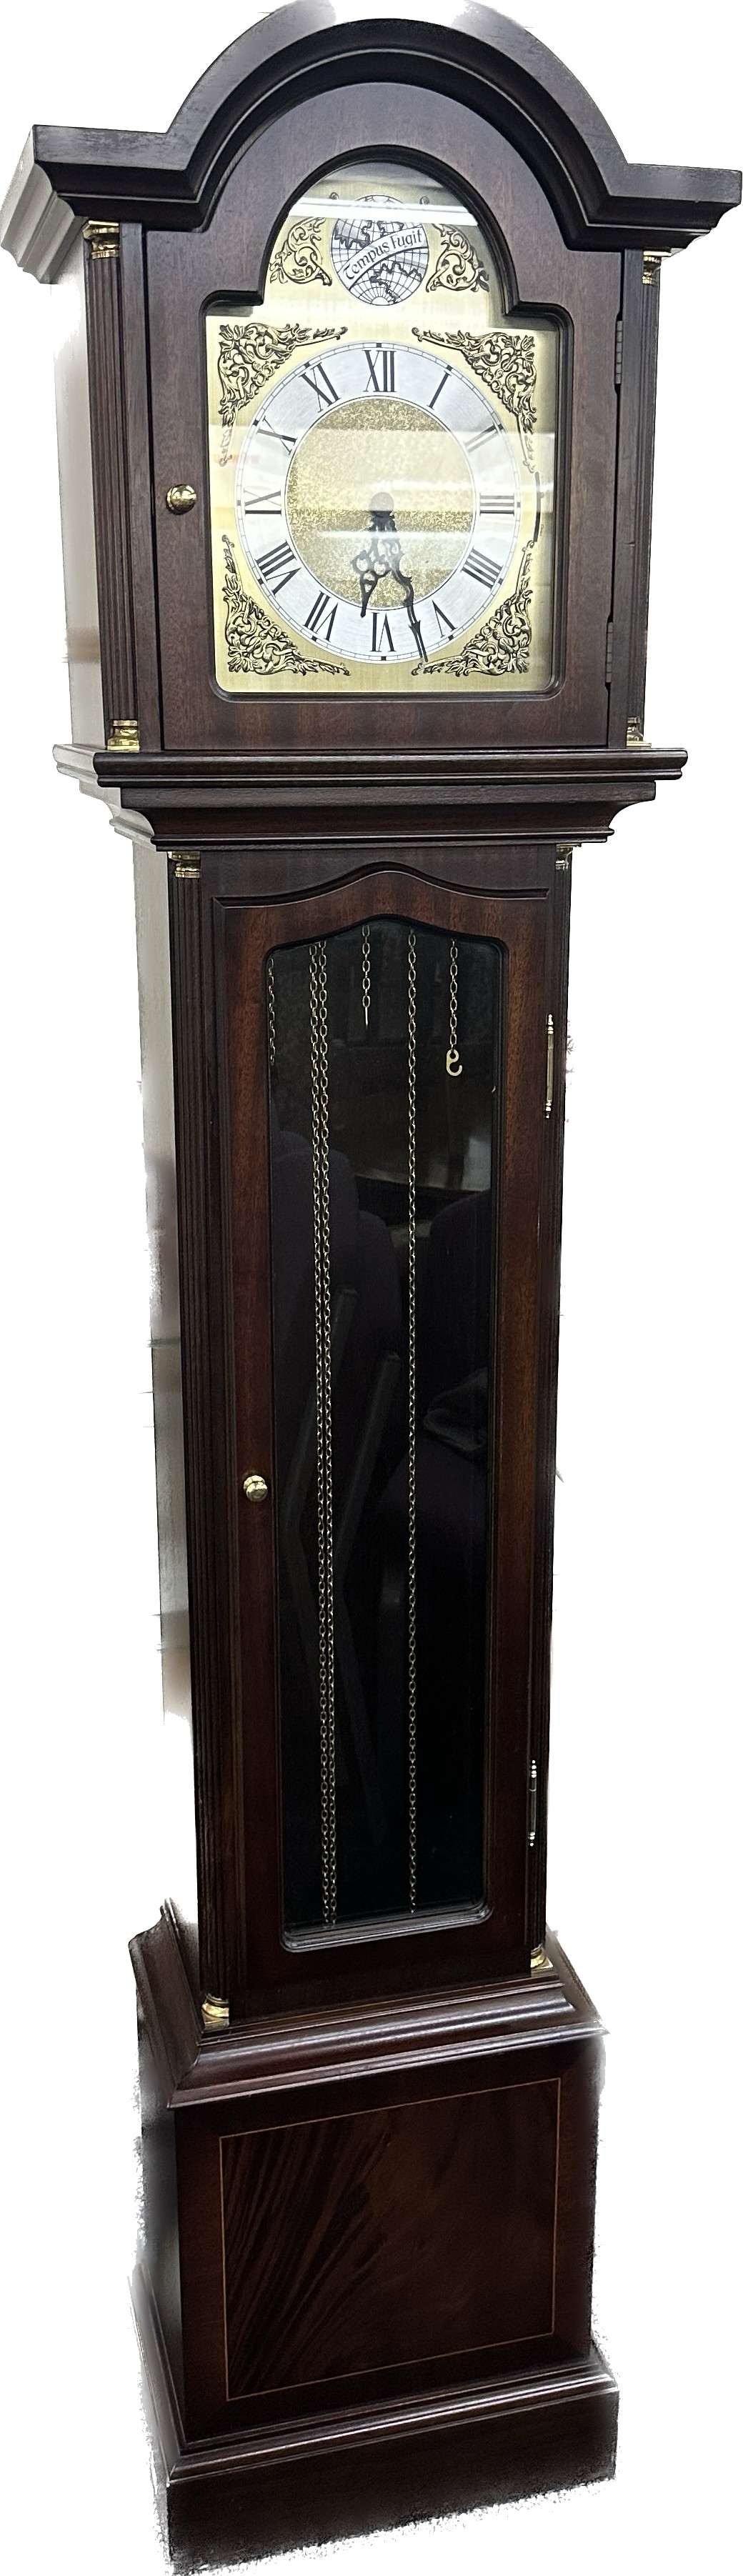 Tempest Fugit grandfather clock, 3 weight, with pendulum - Image 2 of 3